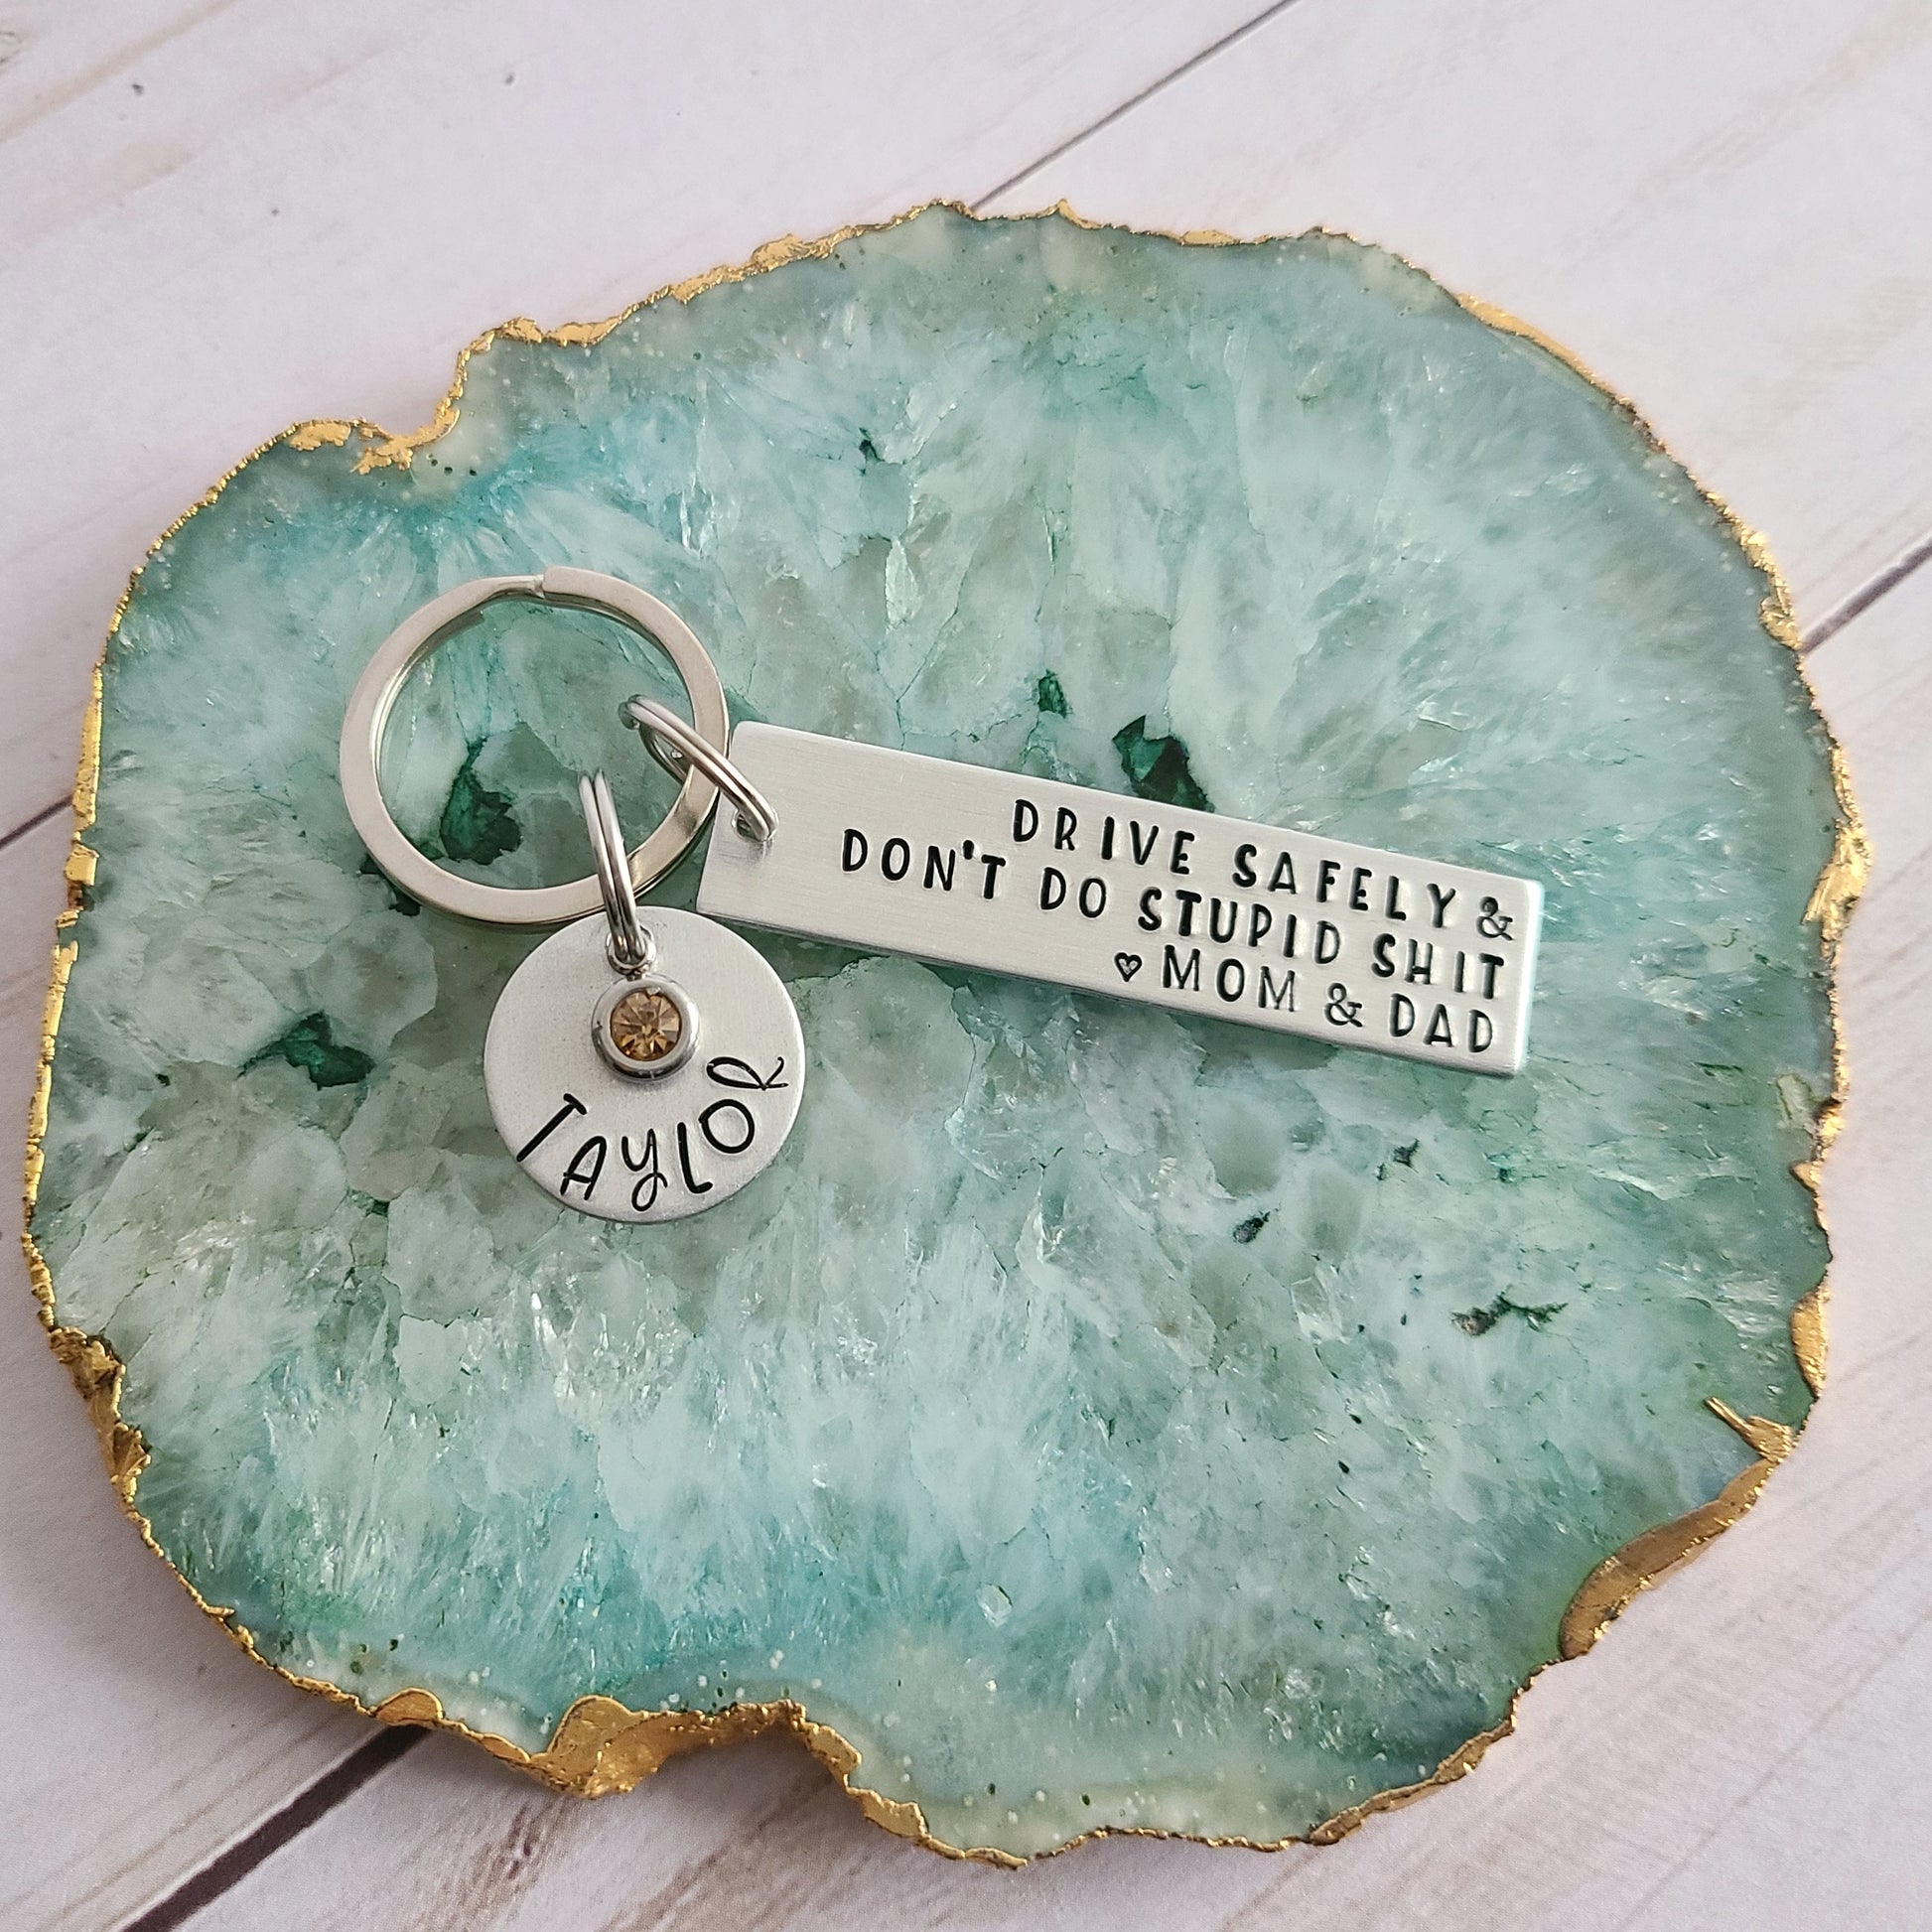 Don't do stupid shit, love (your name here) , keychain, from mom gift, teen  gift, drive safe, be careful, be safe, safe, ride safe, stay safe – SM Made